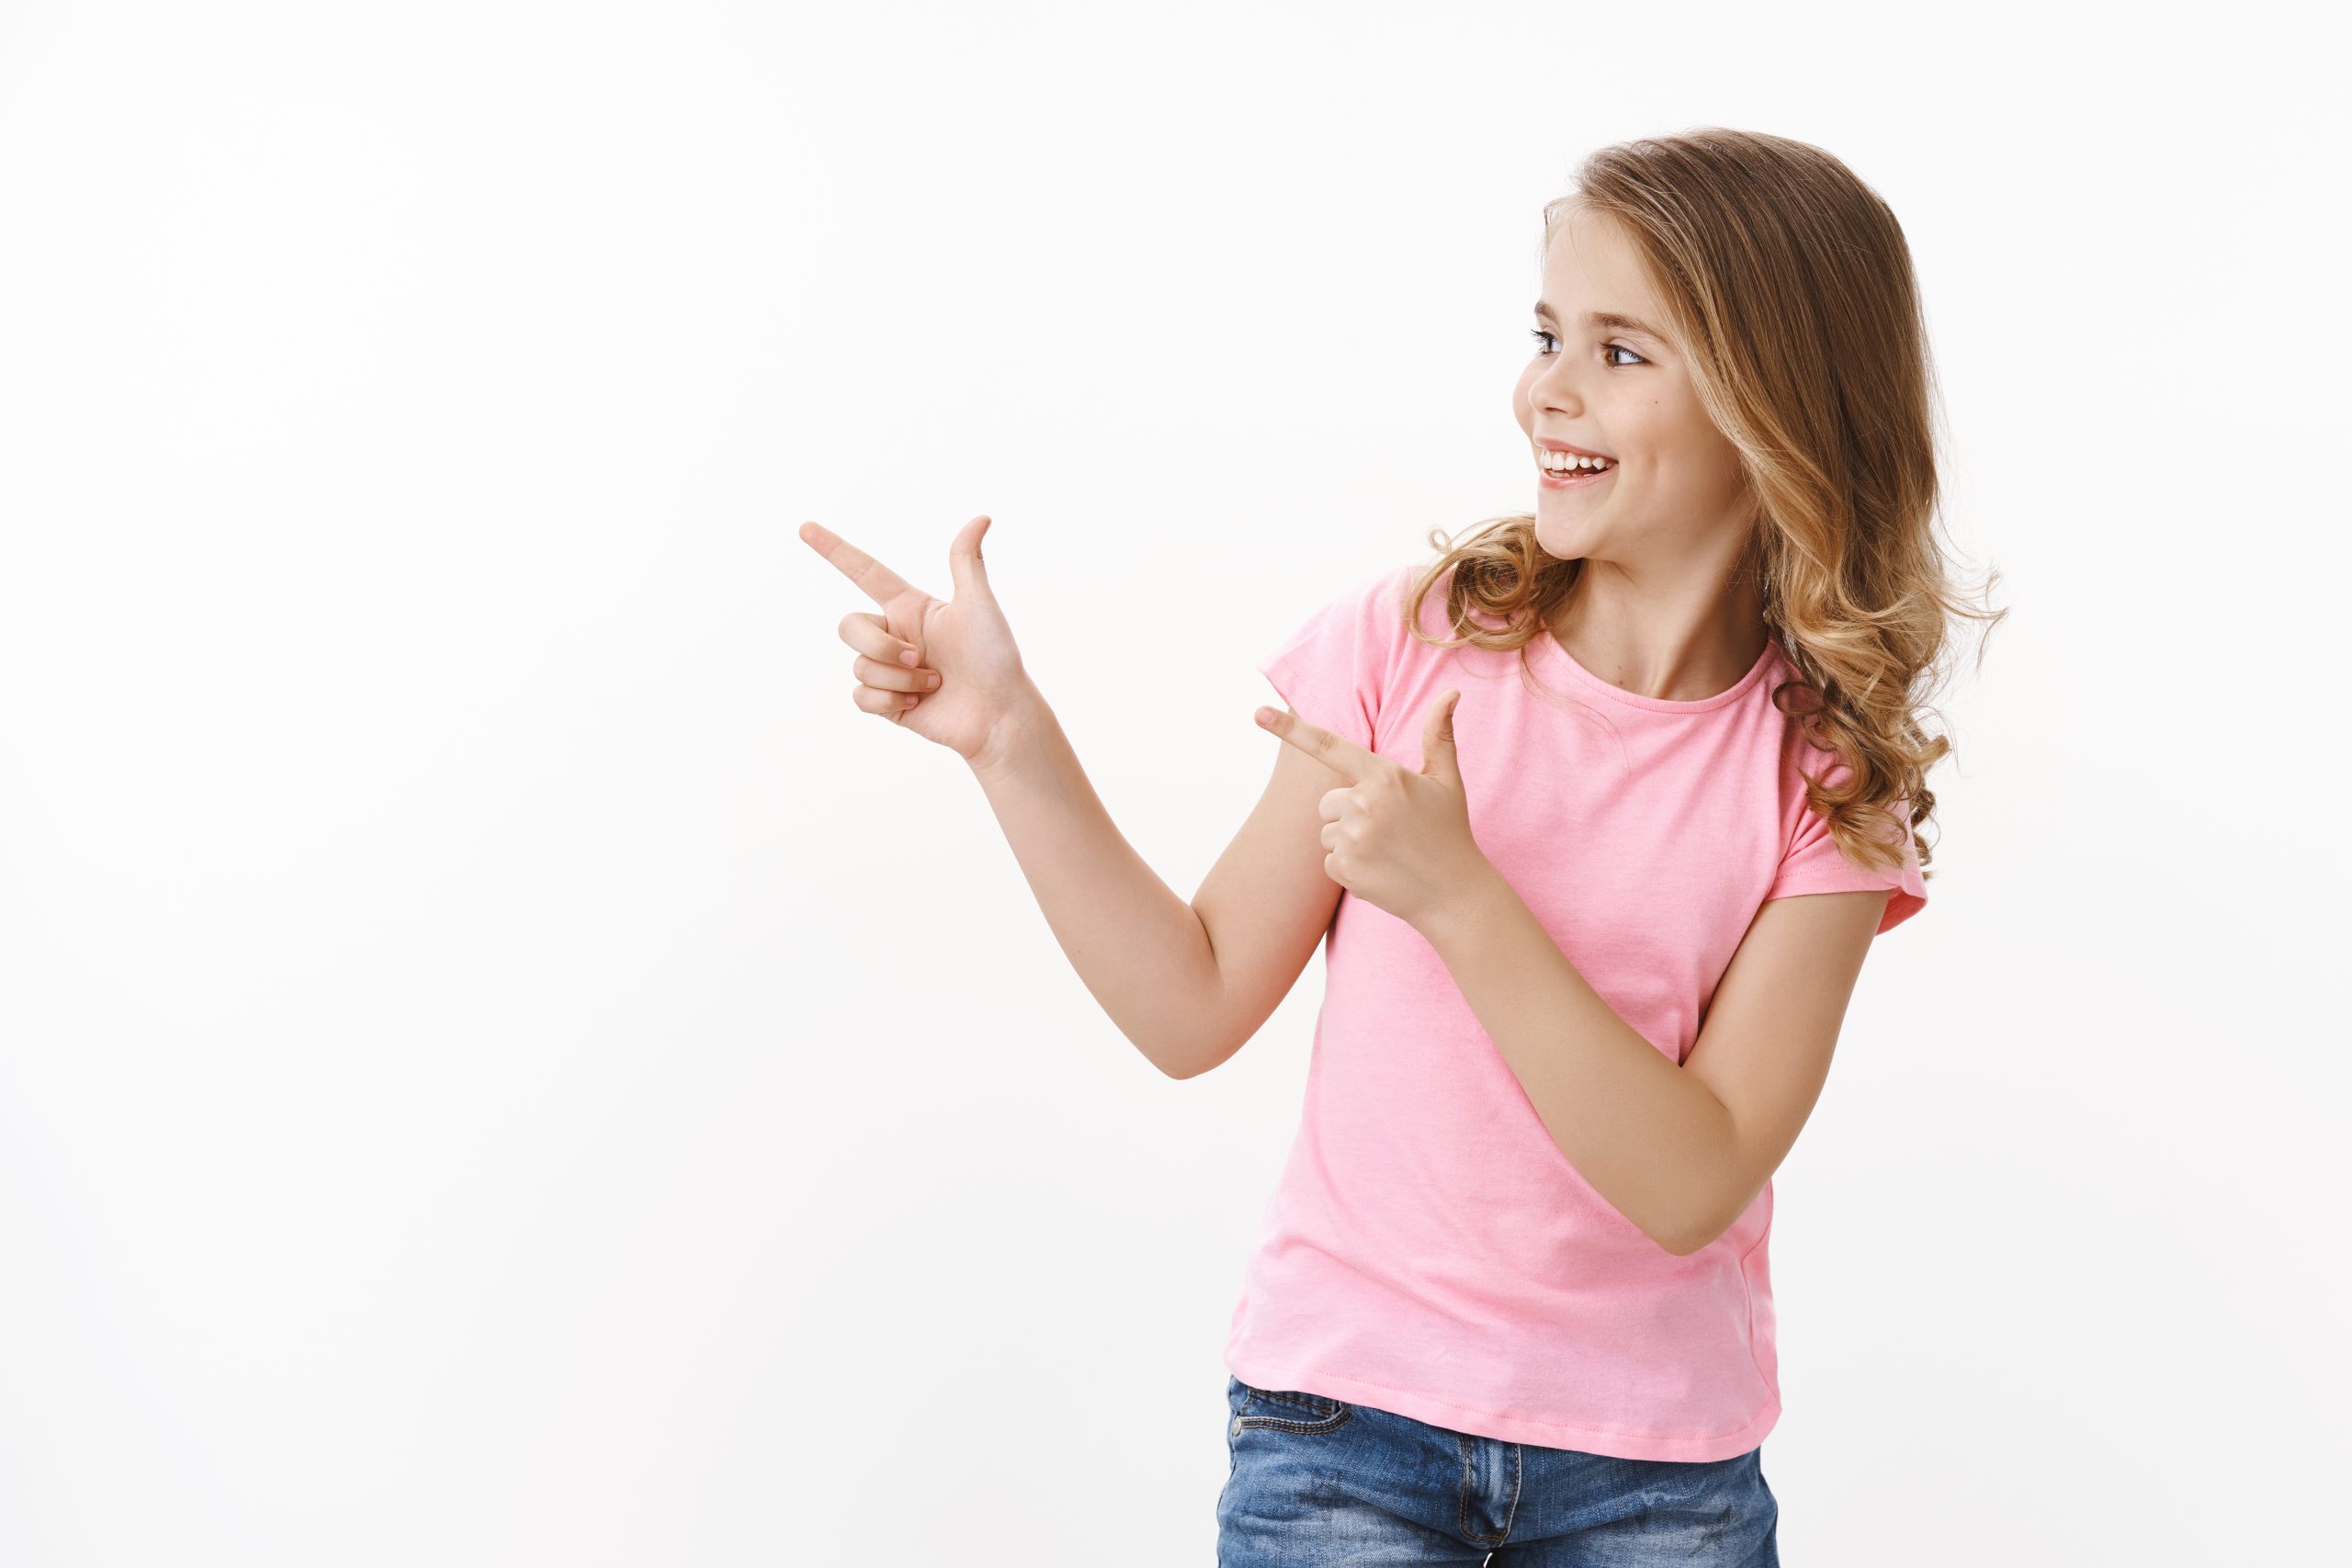 carefree-cheerful-smiling-happy-blond-little-girl-turn-left-pointing-finger-pistols-copy-space-greeting-school-friends-grinning-delighted-child-check-out-cool-copyspace-promo-white-background